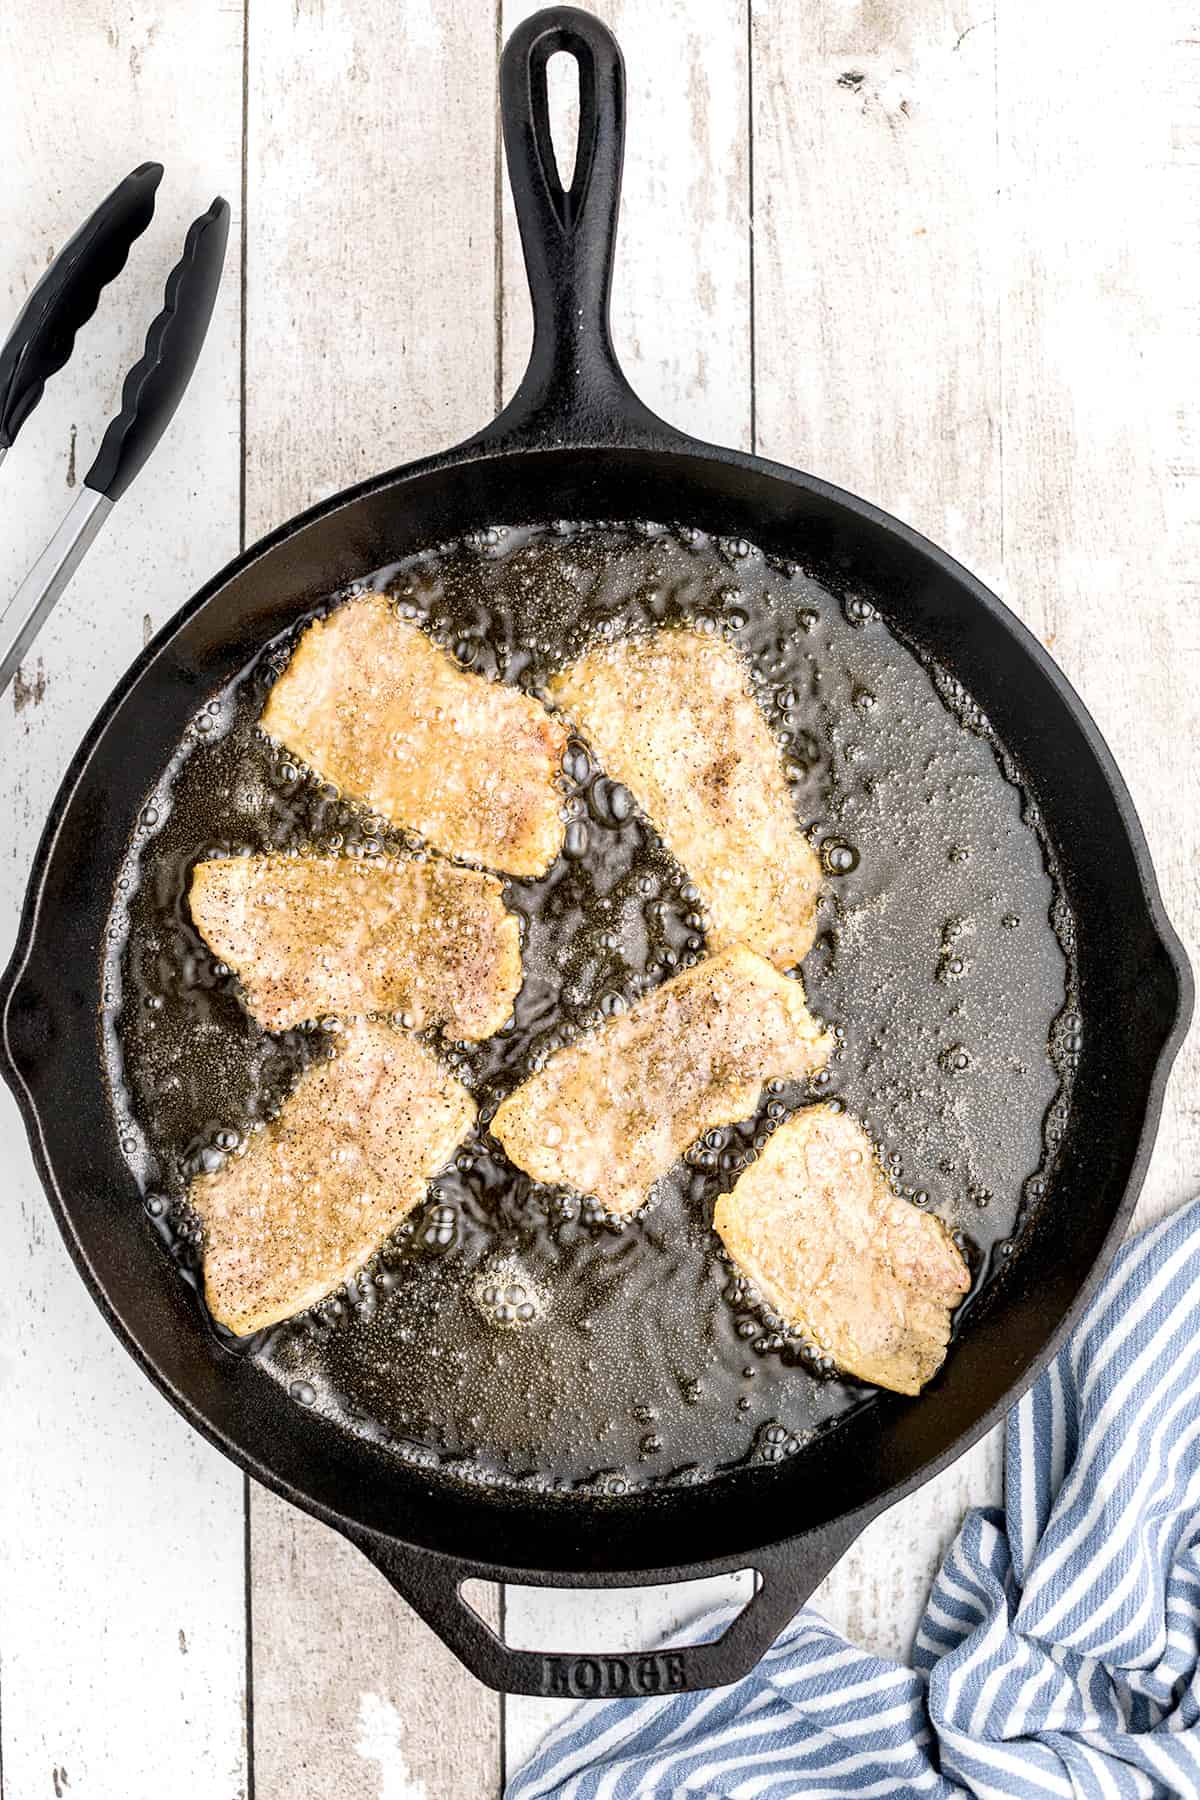 Pork pieces frying in a skillet.